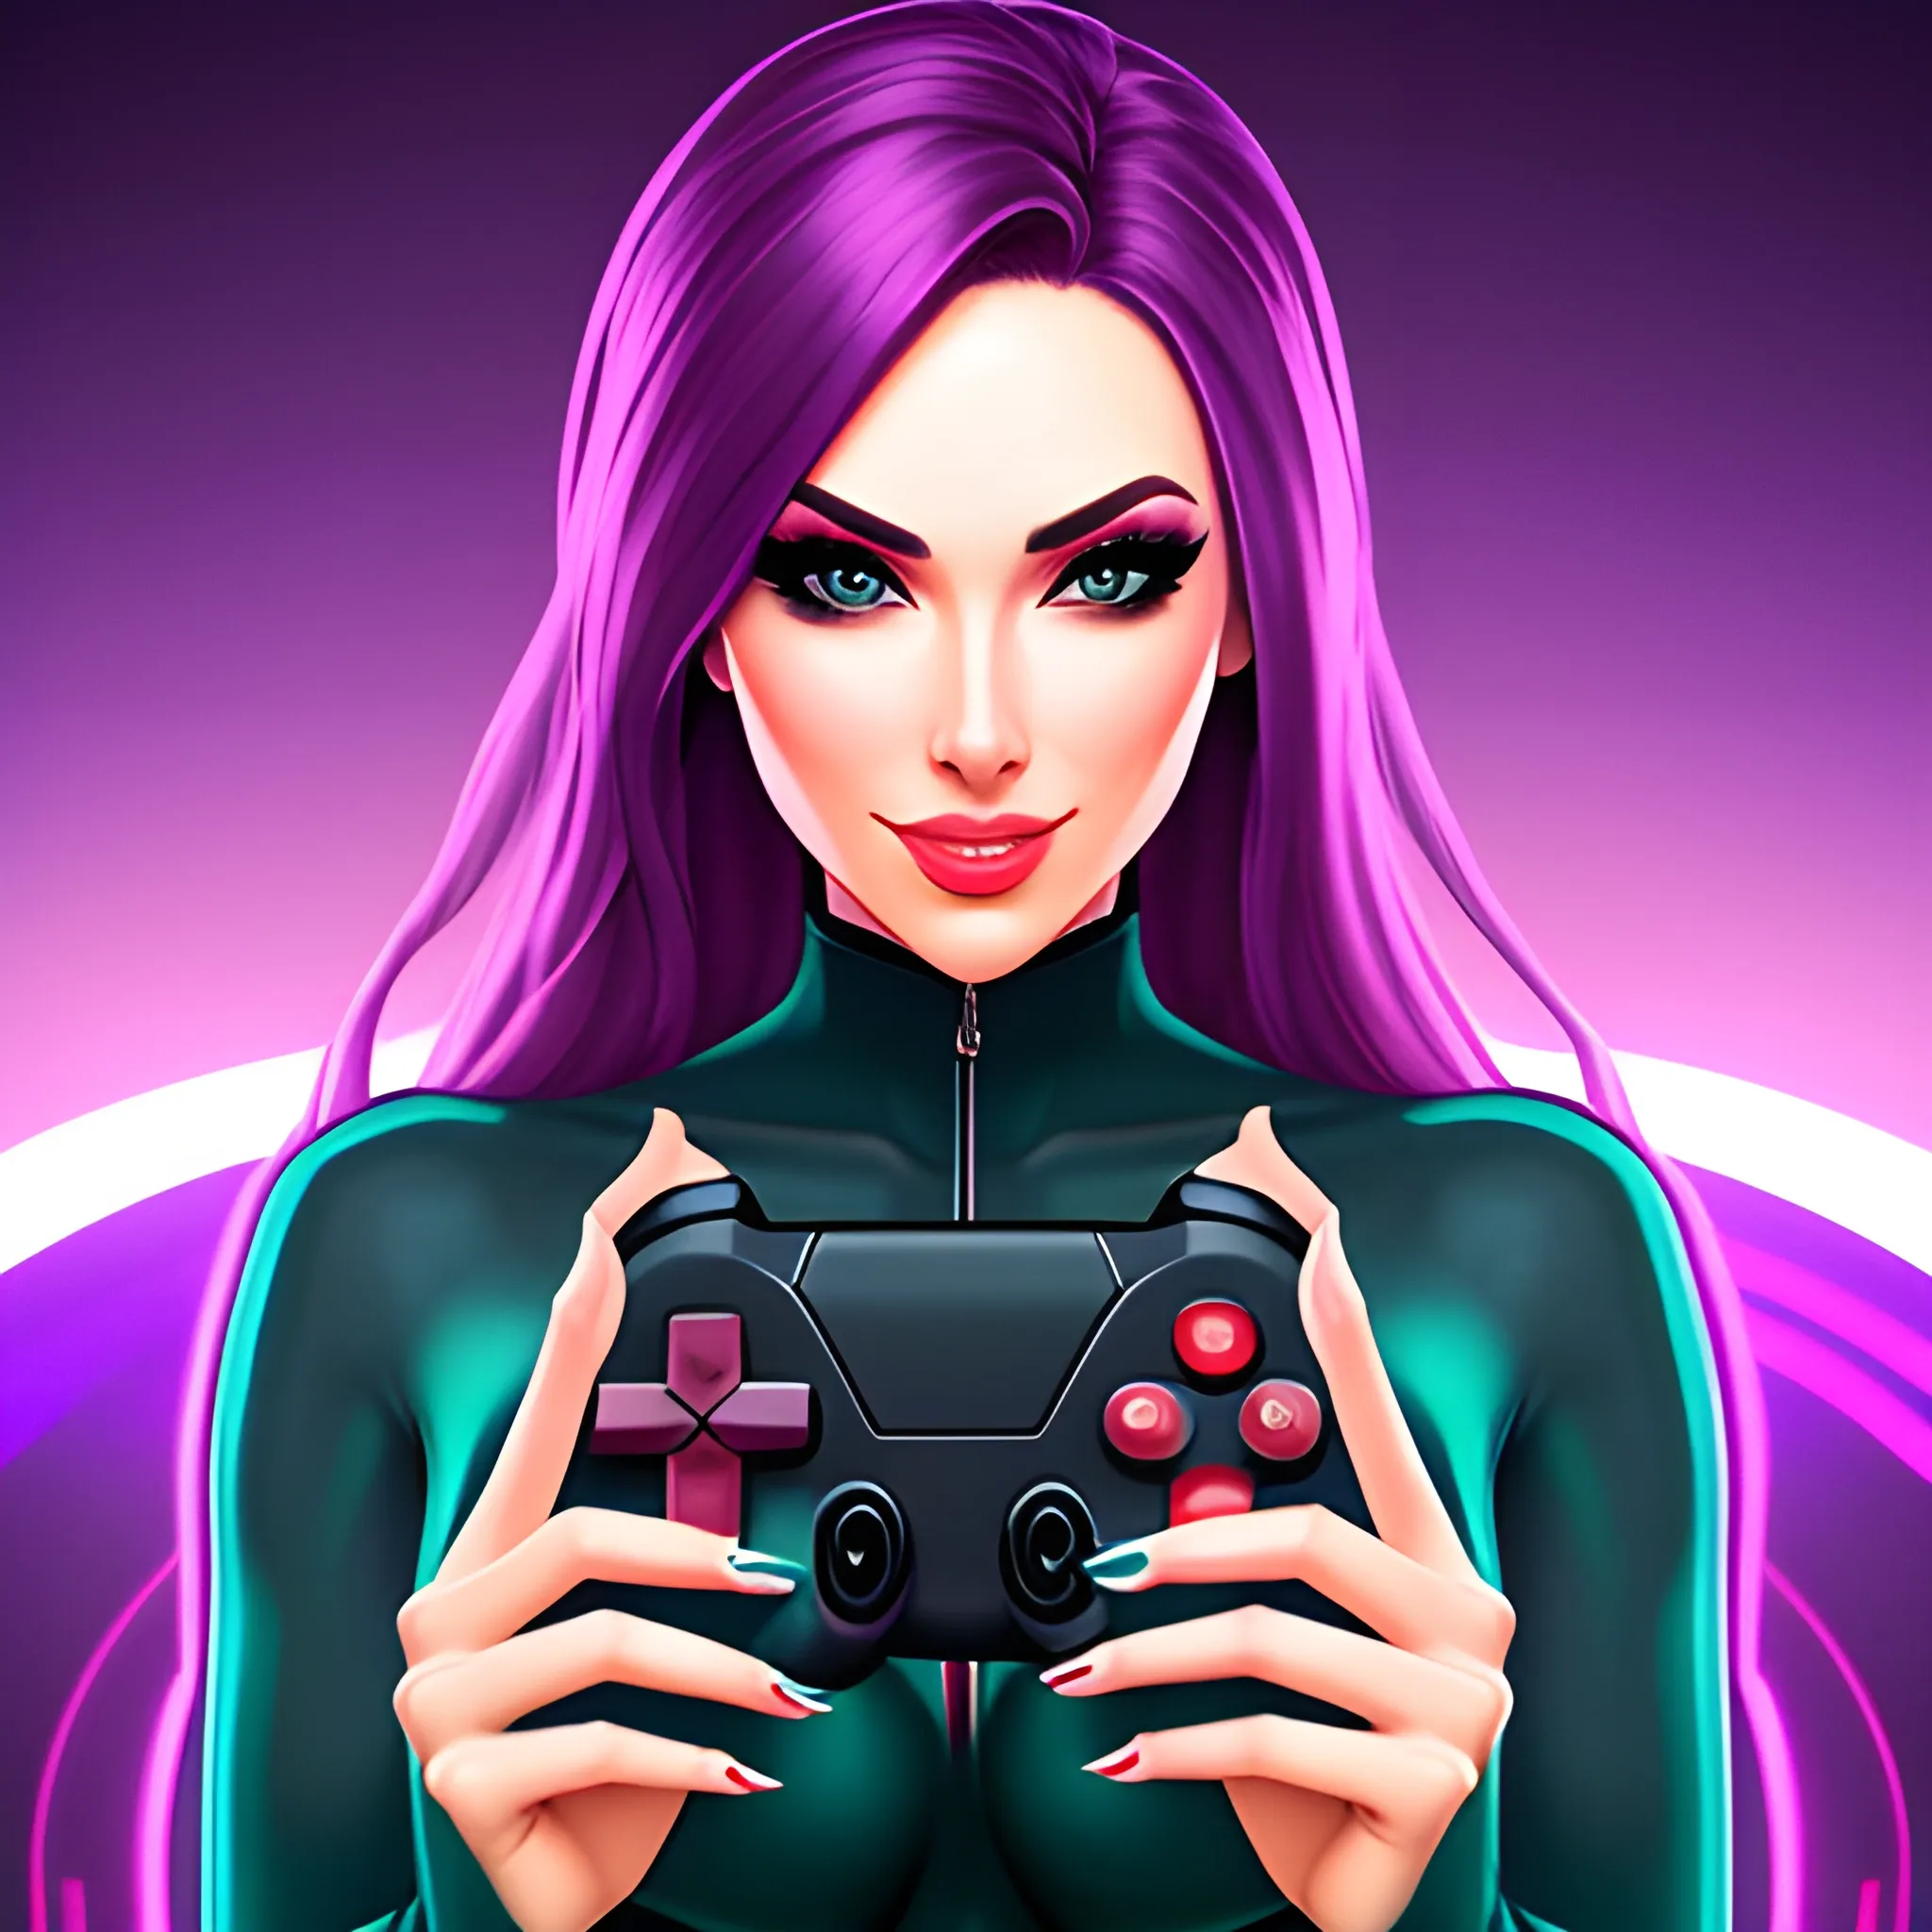 A beautiful girl while streaming, attractive gaming background, 2d hd mascot
